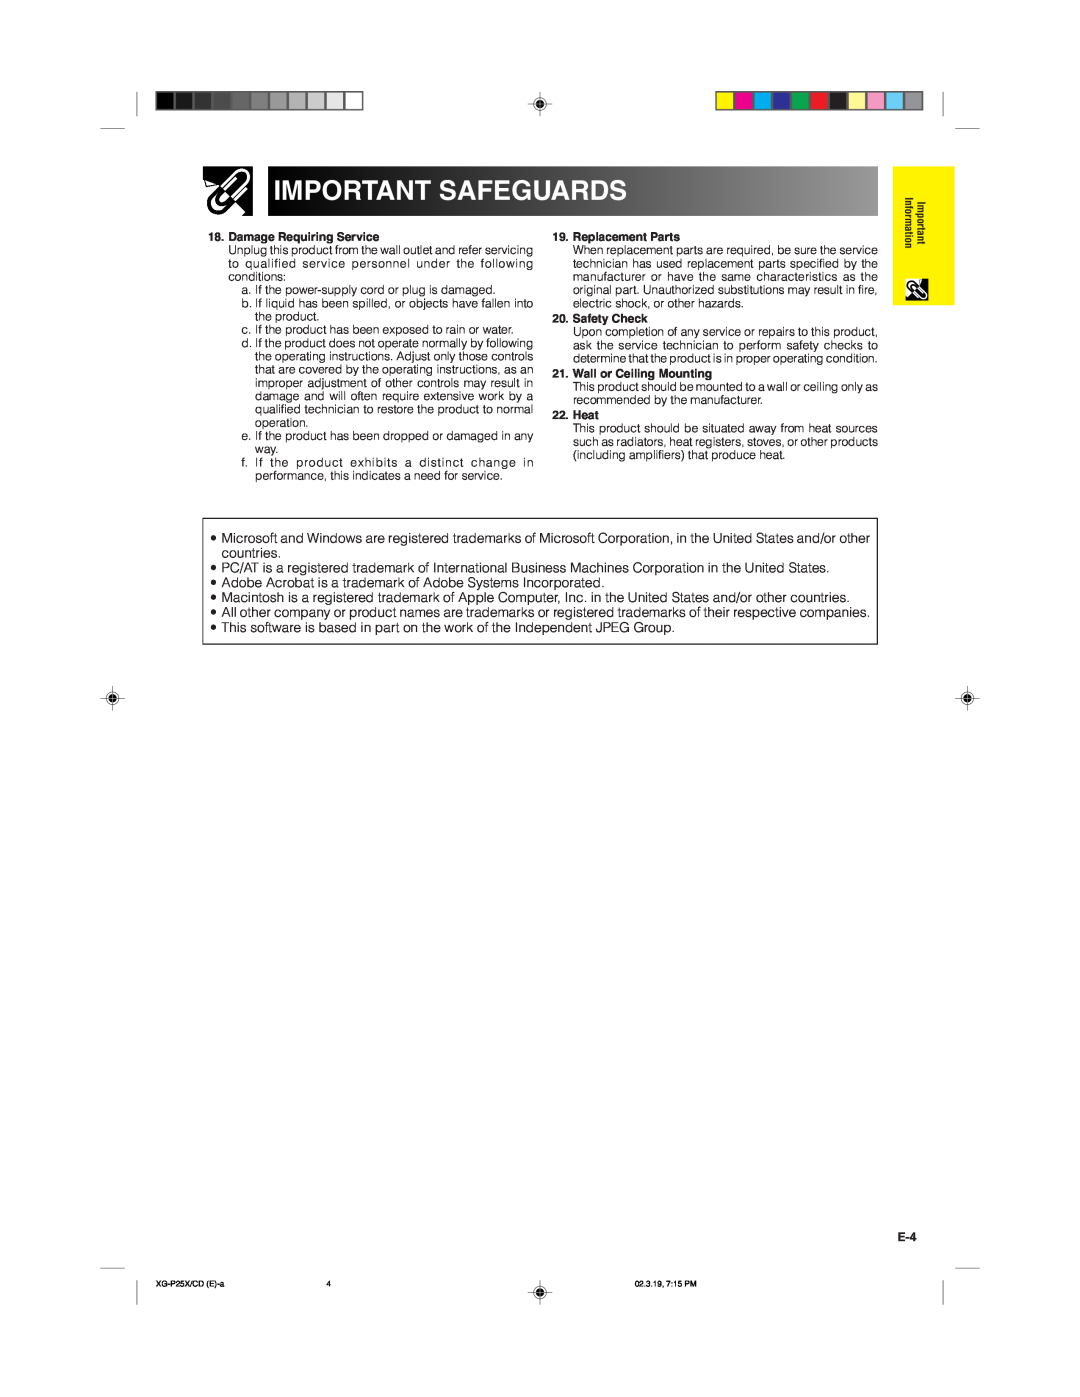 Sharp XG-P25X operation manual Important Safeguards, Adobe Acrobat is a trademark of Adobe Systems Incorporated 